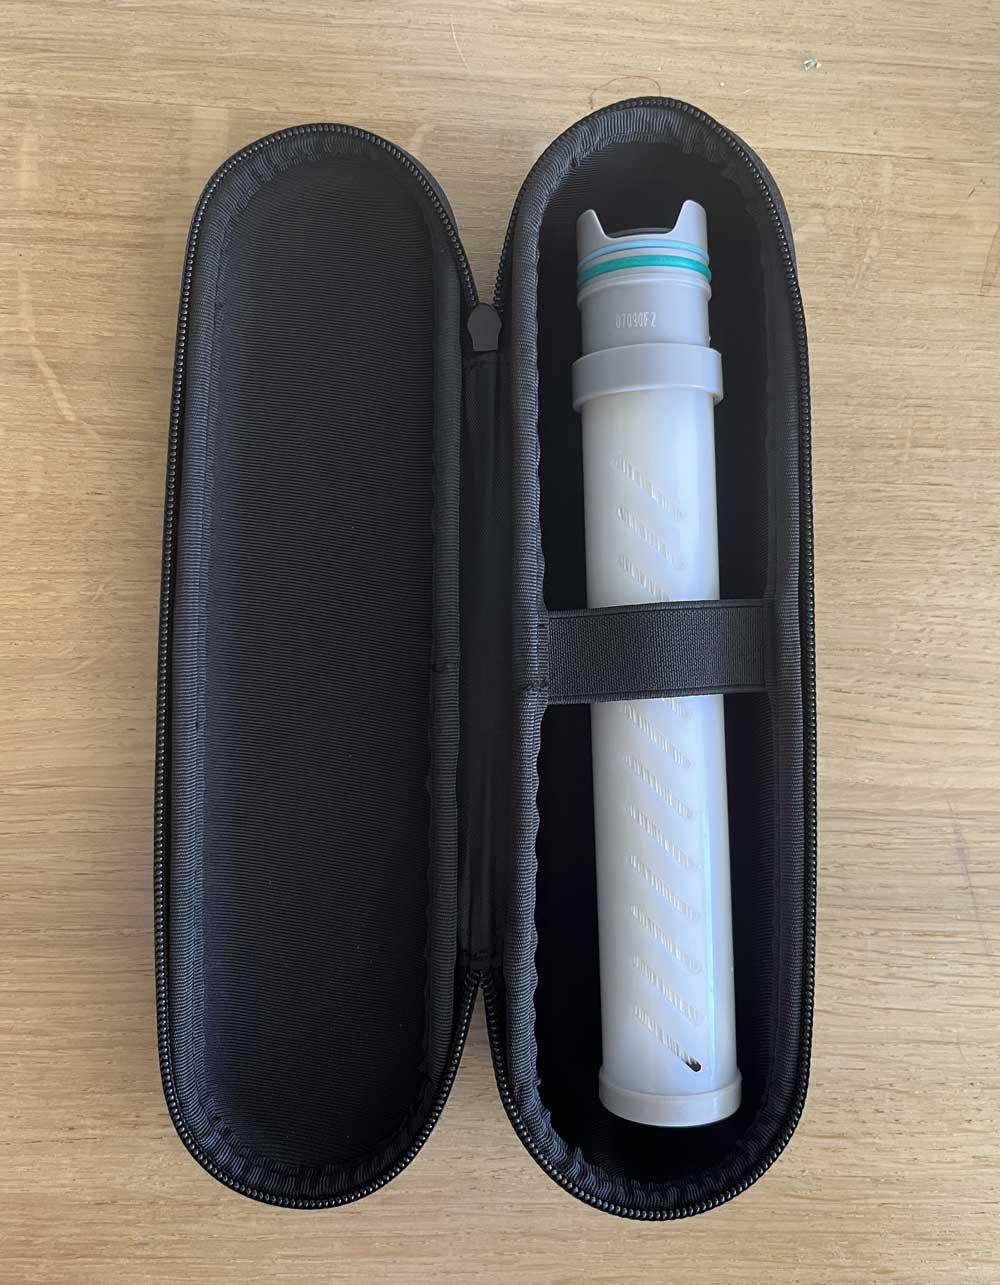 Lifestraw Peak Personal Water Filter Carry Case